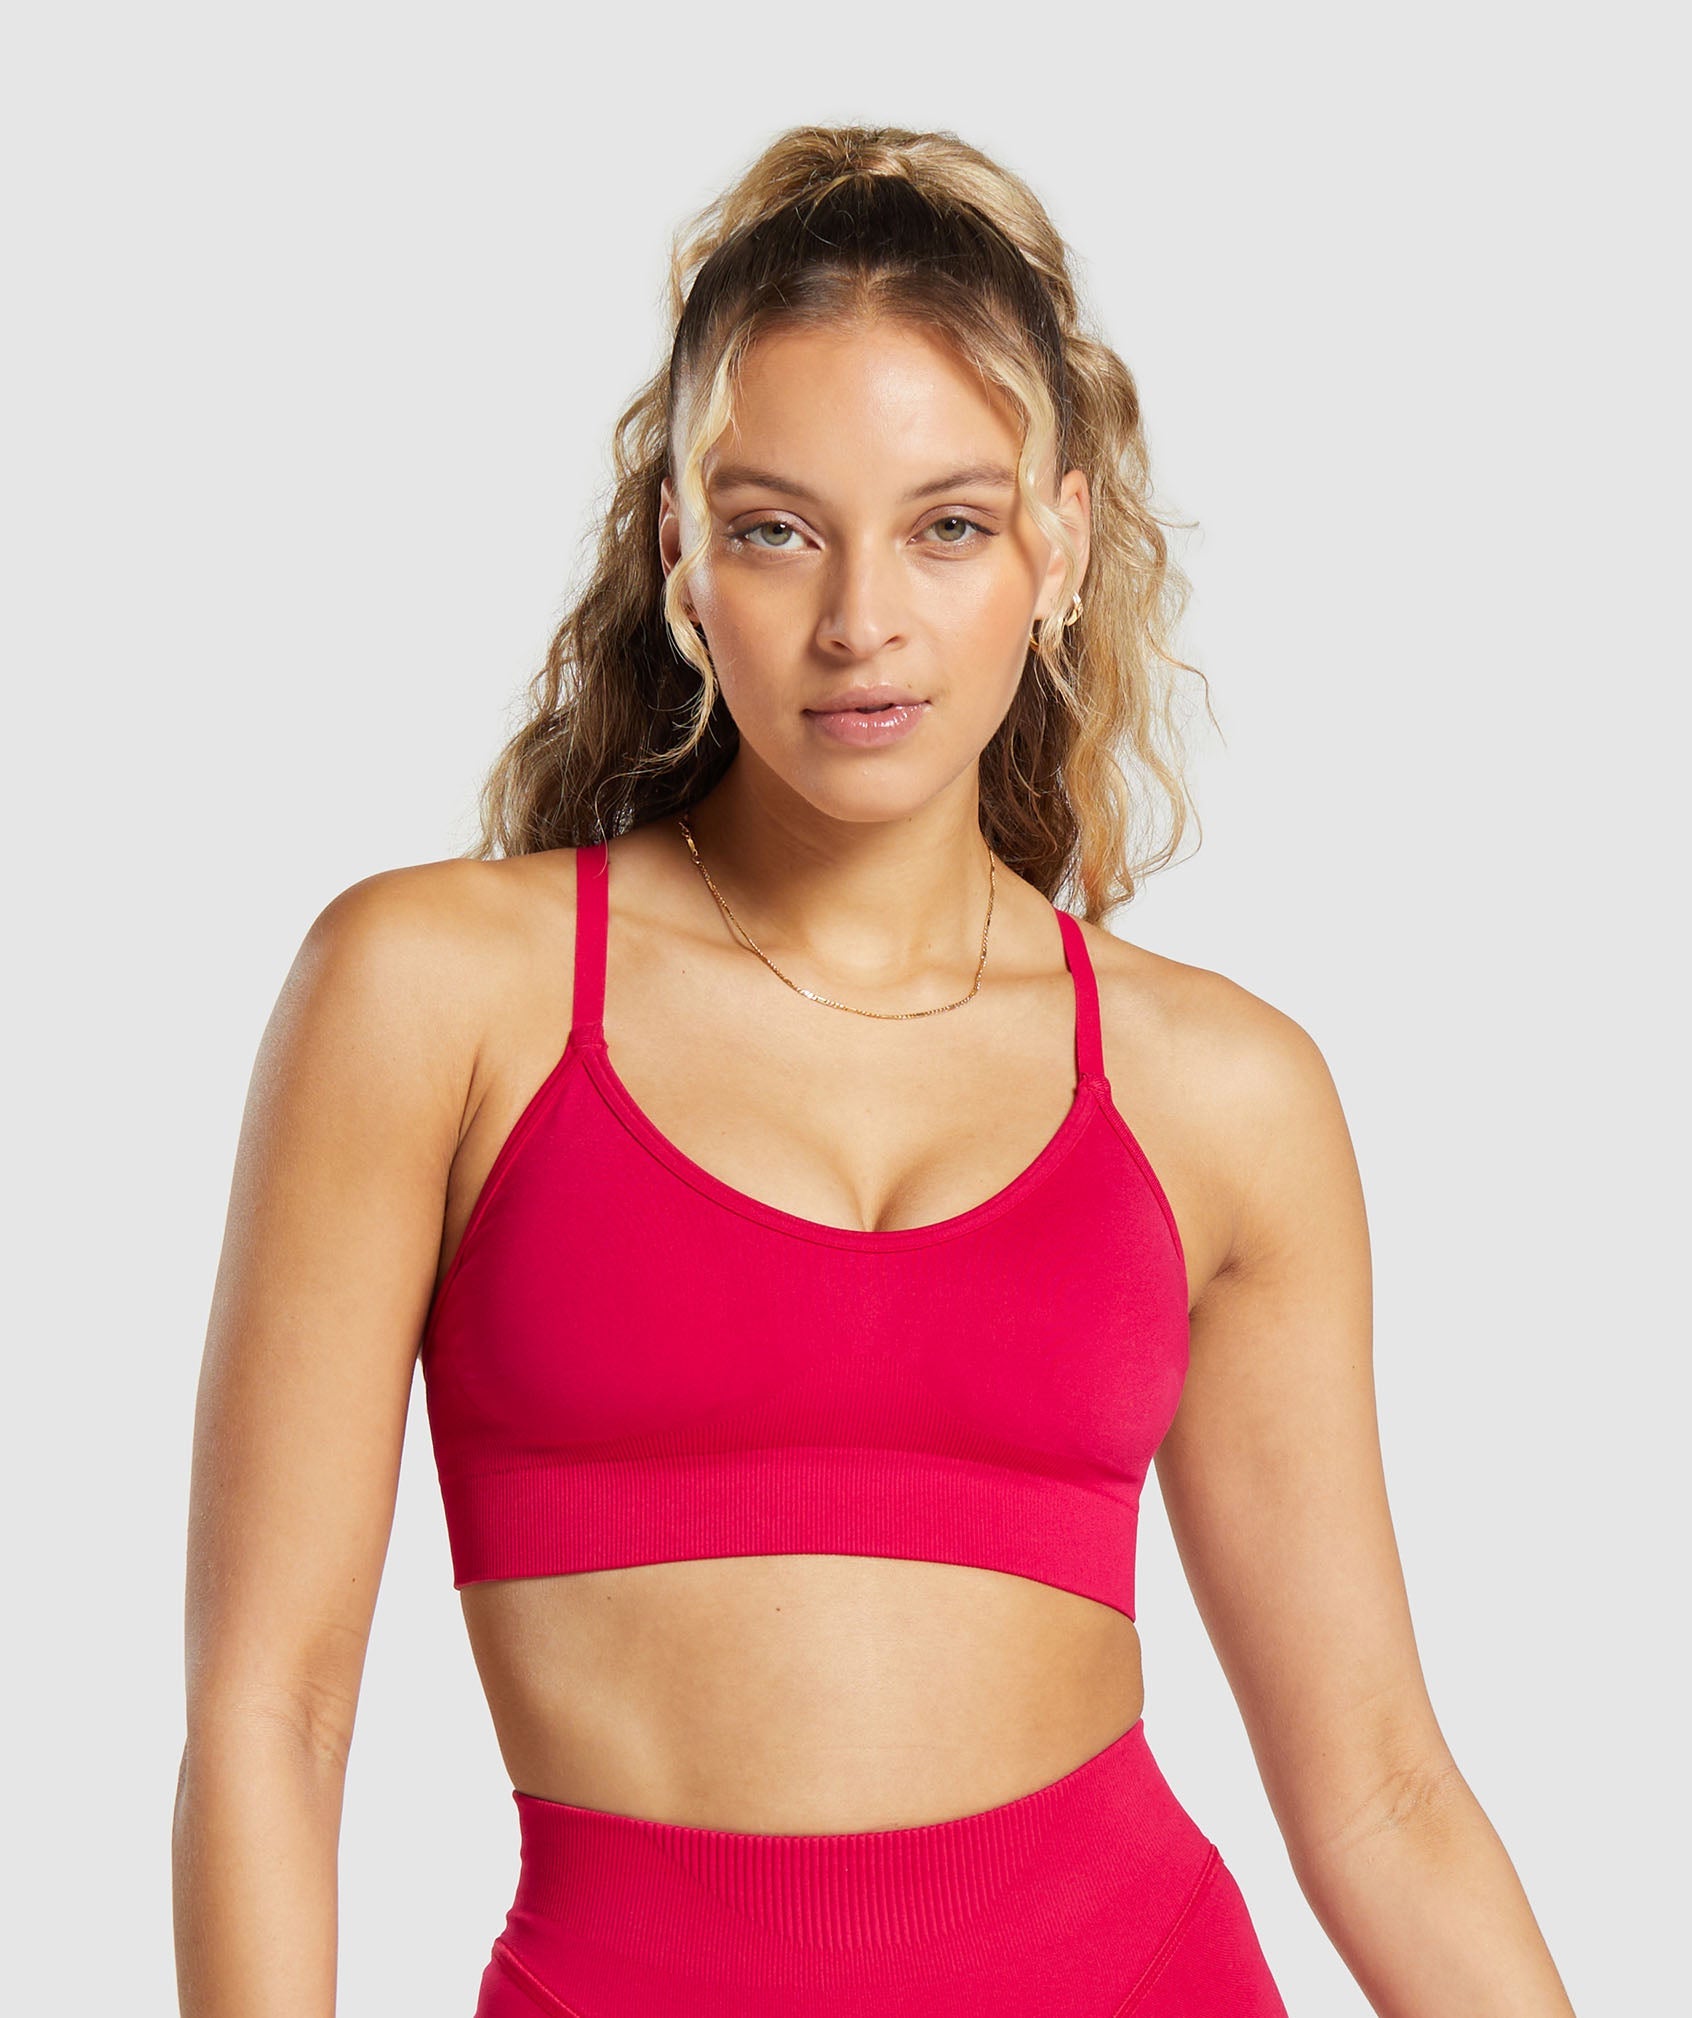 Pink Ombré Gymshark Set. Leggings and Sports bra size small 